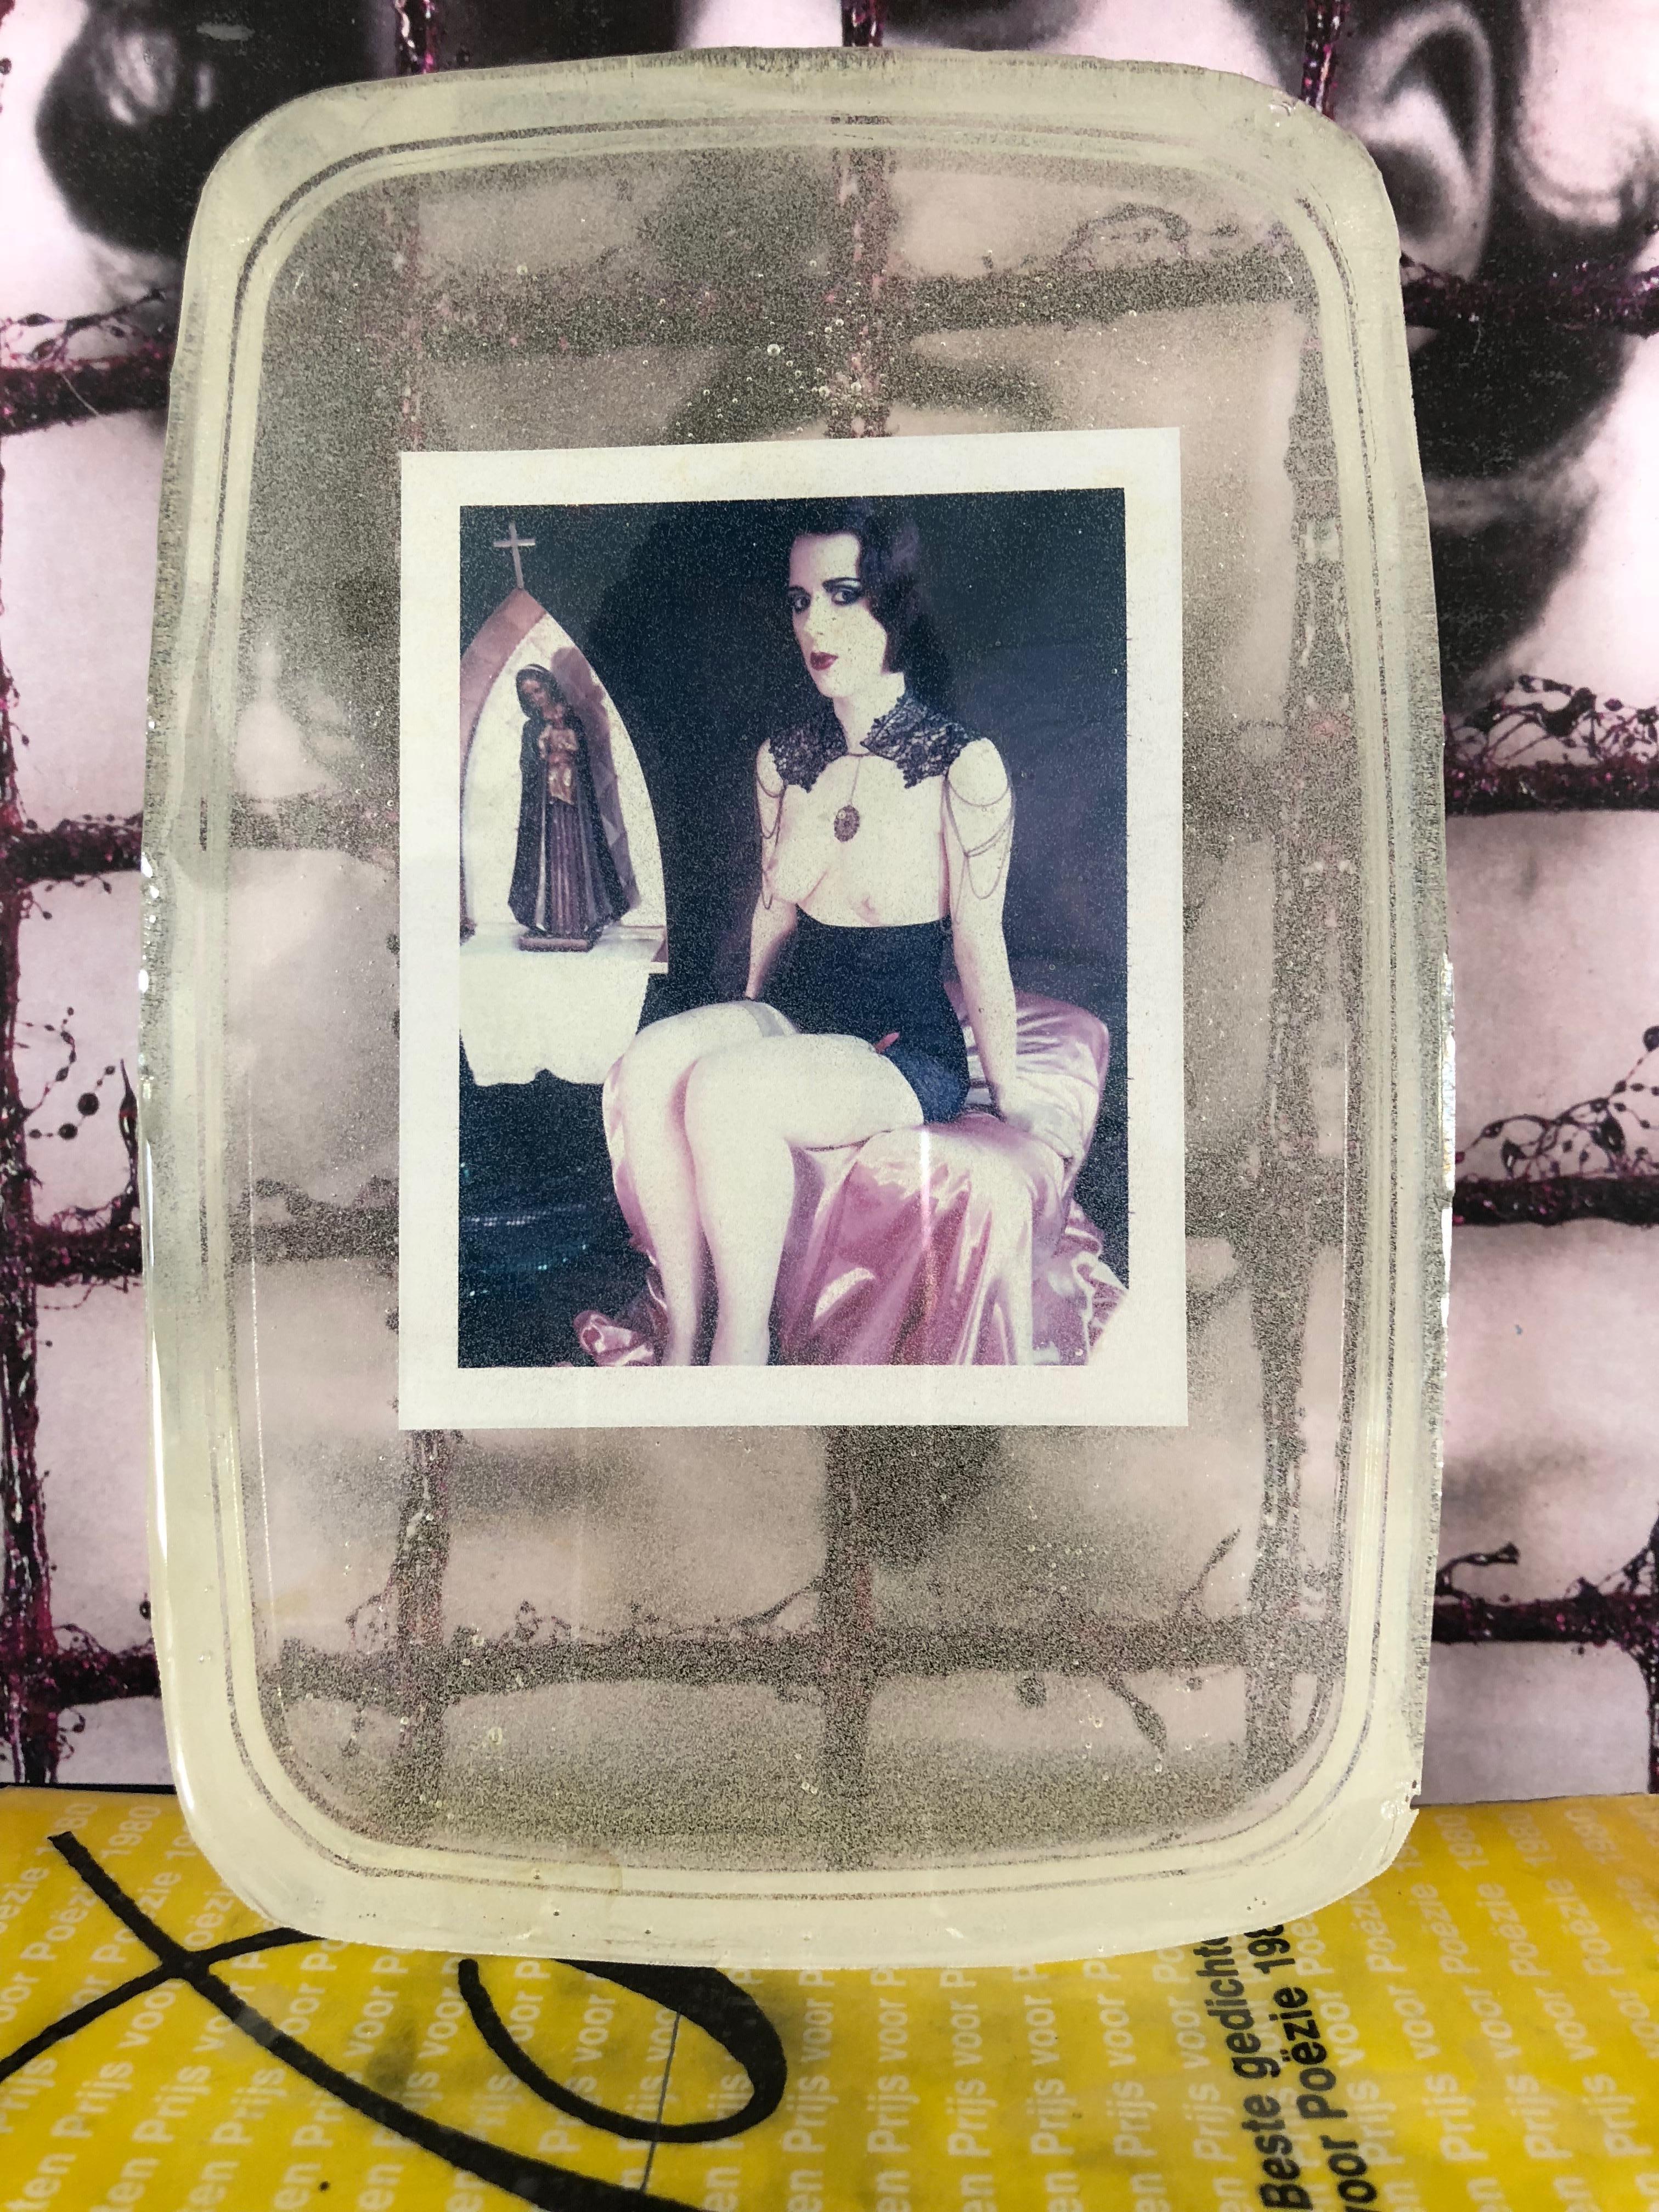 Lourdes #HS01, 2014, 13 x 20 x 2 cm
[Scene from the series Odd Stories]
Original Polaroid - PIÈCE UNIQUE 
Hand cast in resin by the artist
Patented Procédé © Carmen De Vos
Hand signed & certificate by the artist 

This piece was exhibited at the